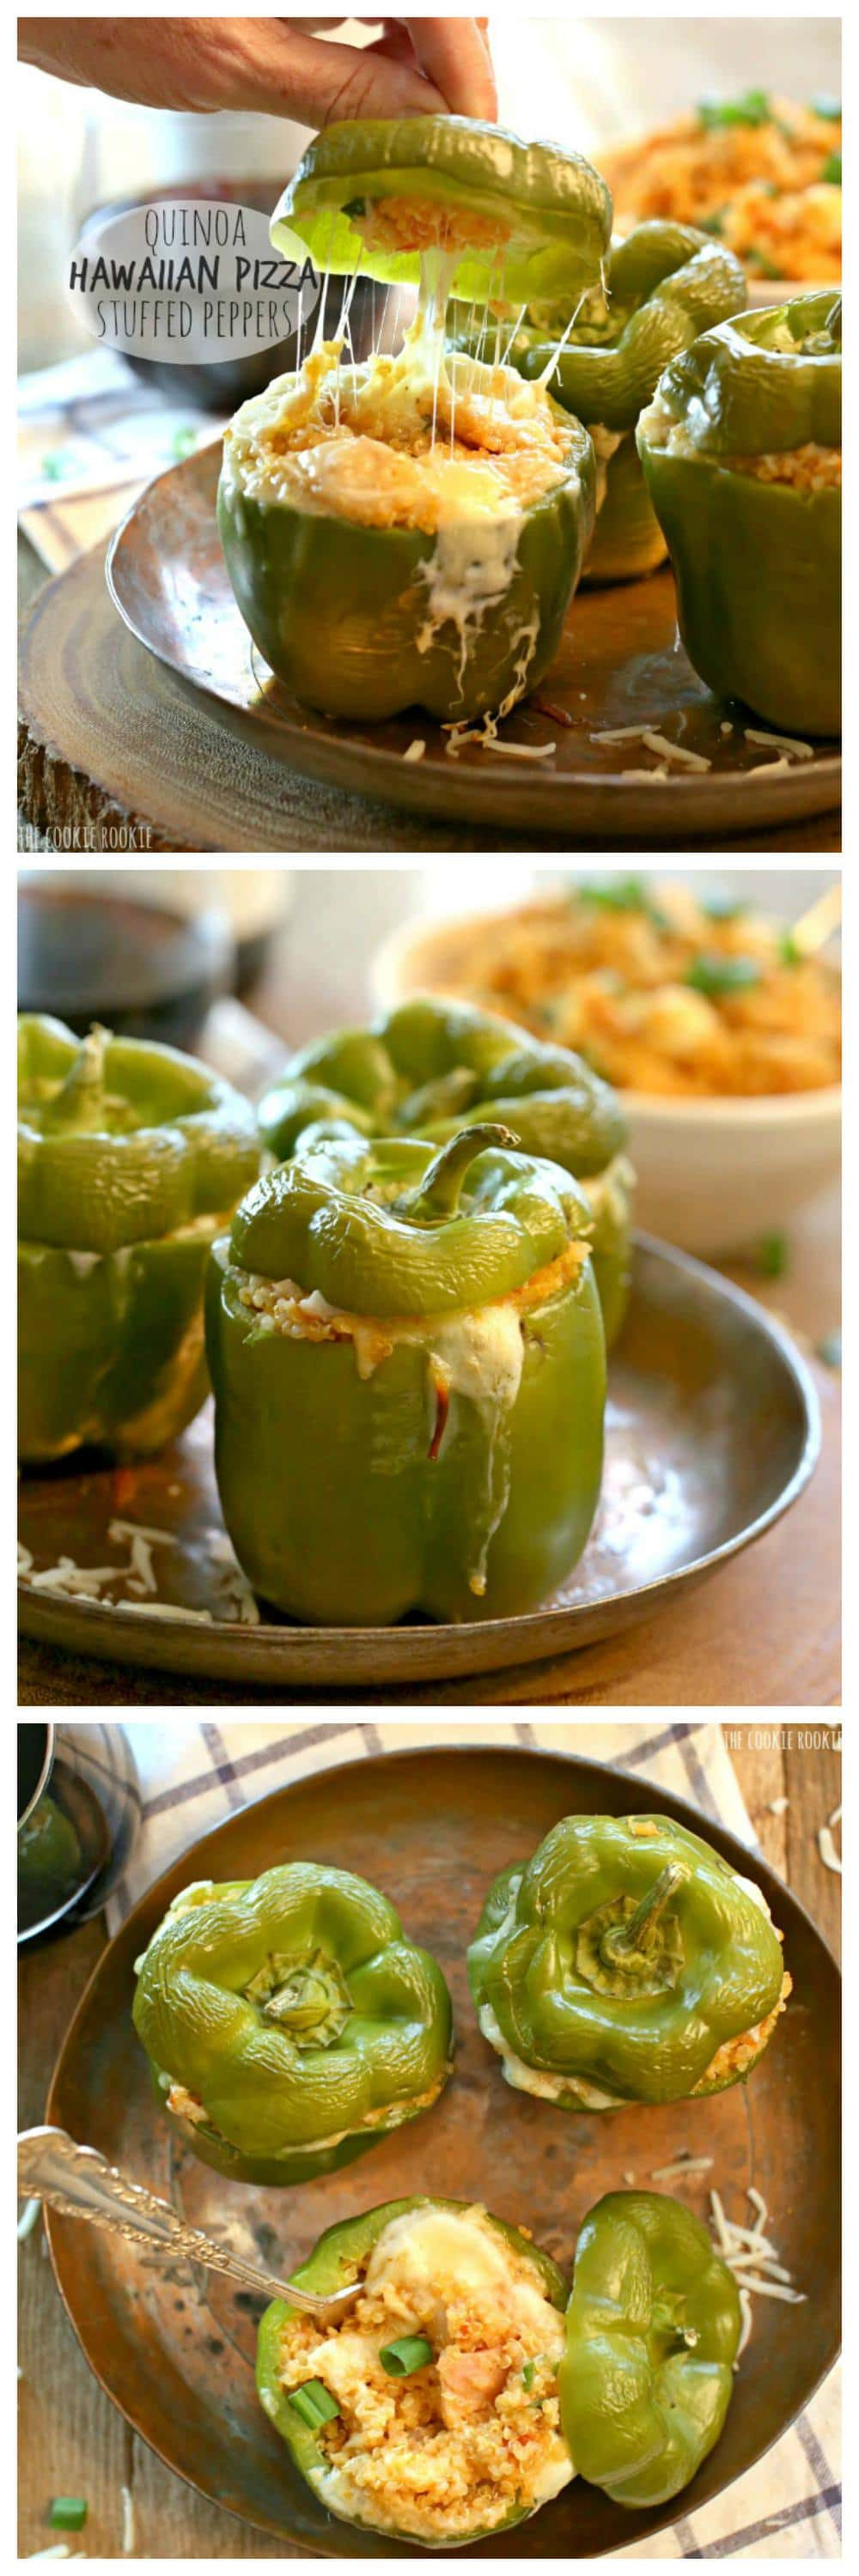 Healthy Side Dishes For Pizza
 Quinoa Hawaiian Pizza Stuffed Peppers